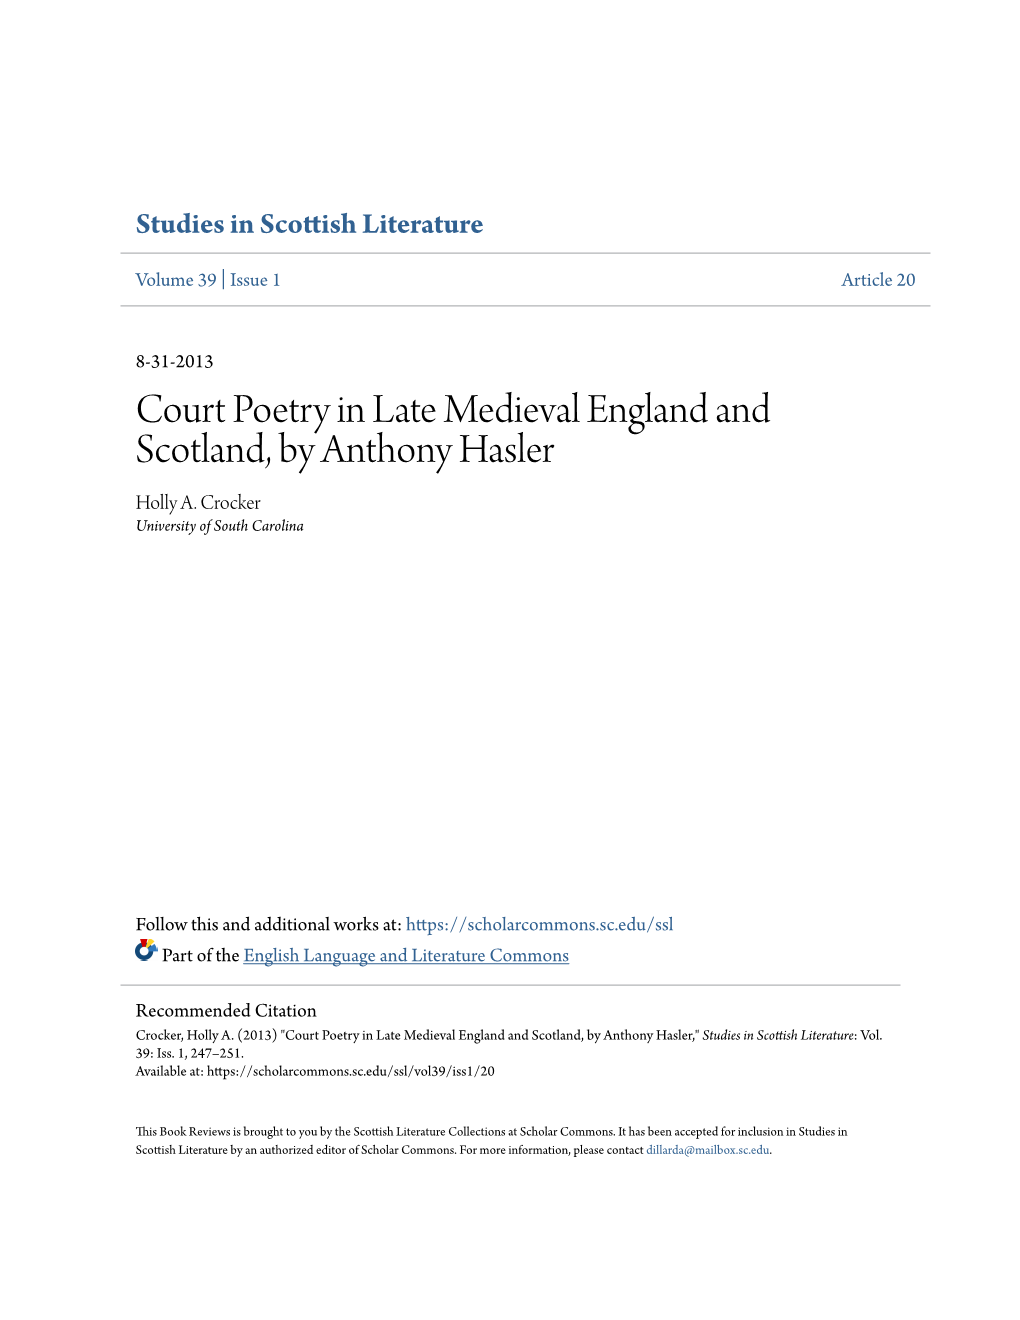 Court Poetry in Late Medieval England and Scotland, by Anthony Hasler Holly A